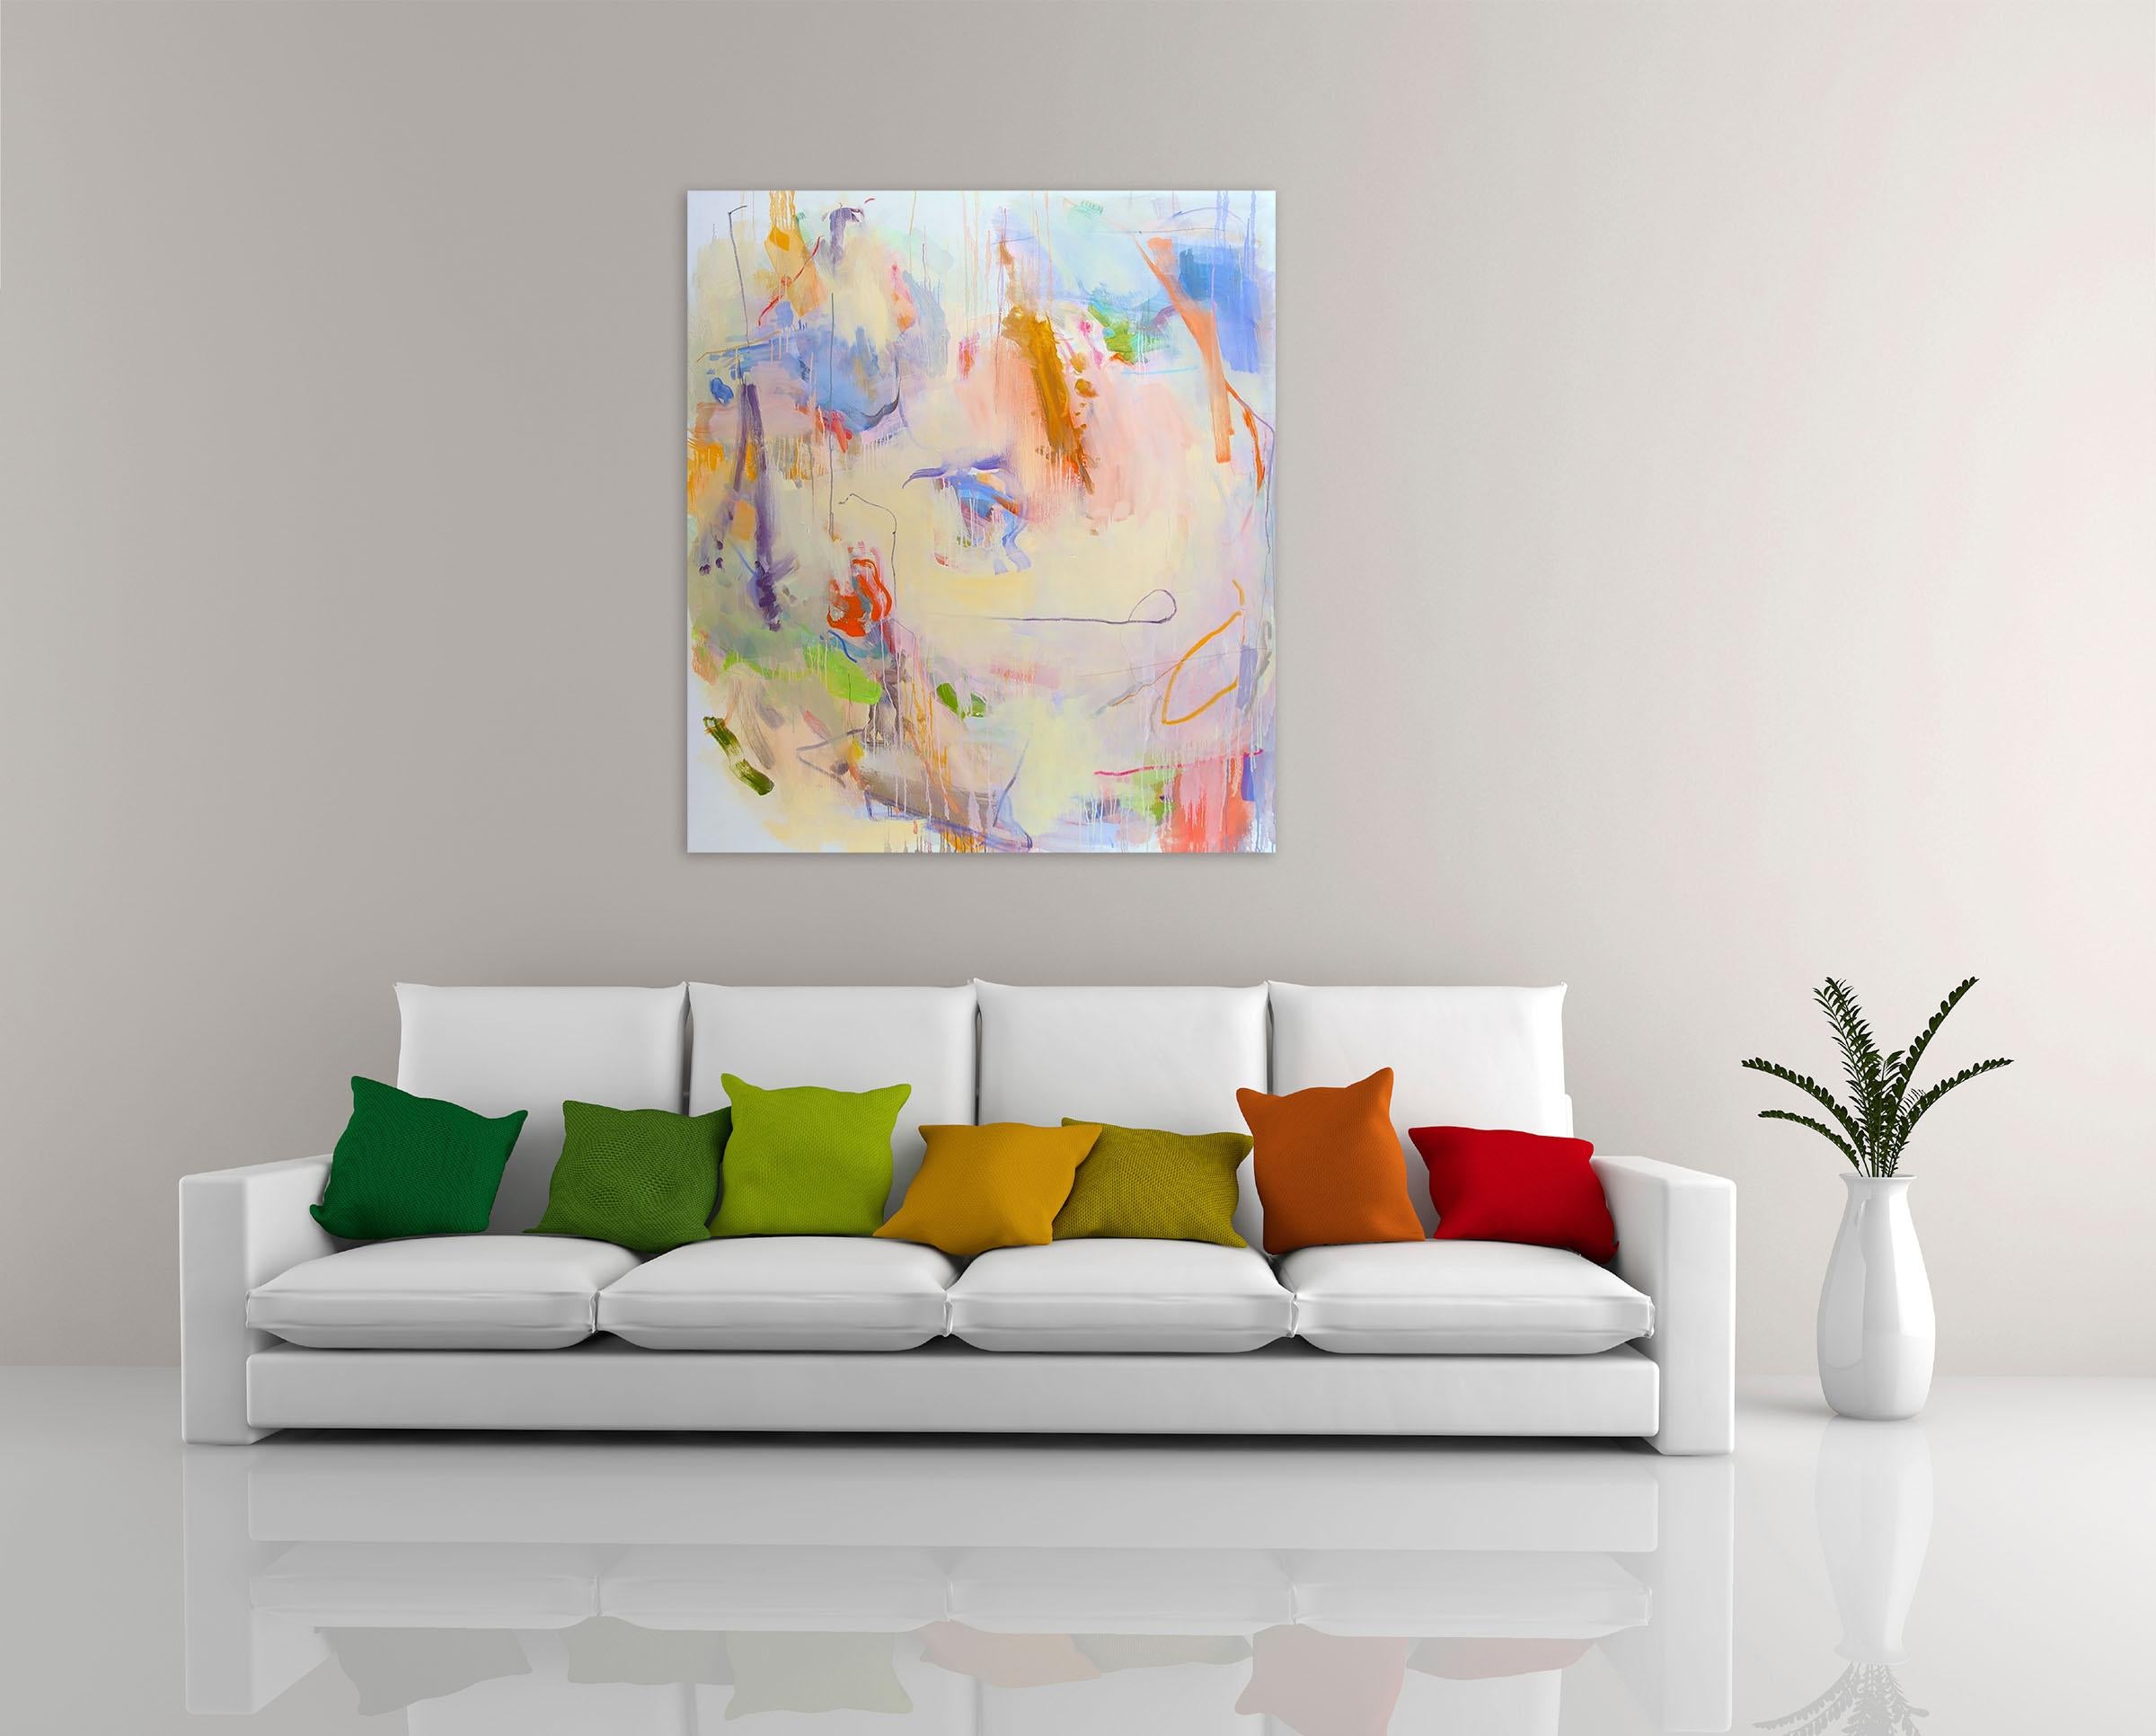 Faded Light (Abstract Expressionism painting) - Painting by Gina Werfel